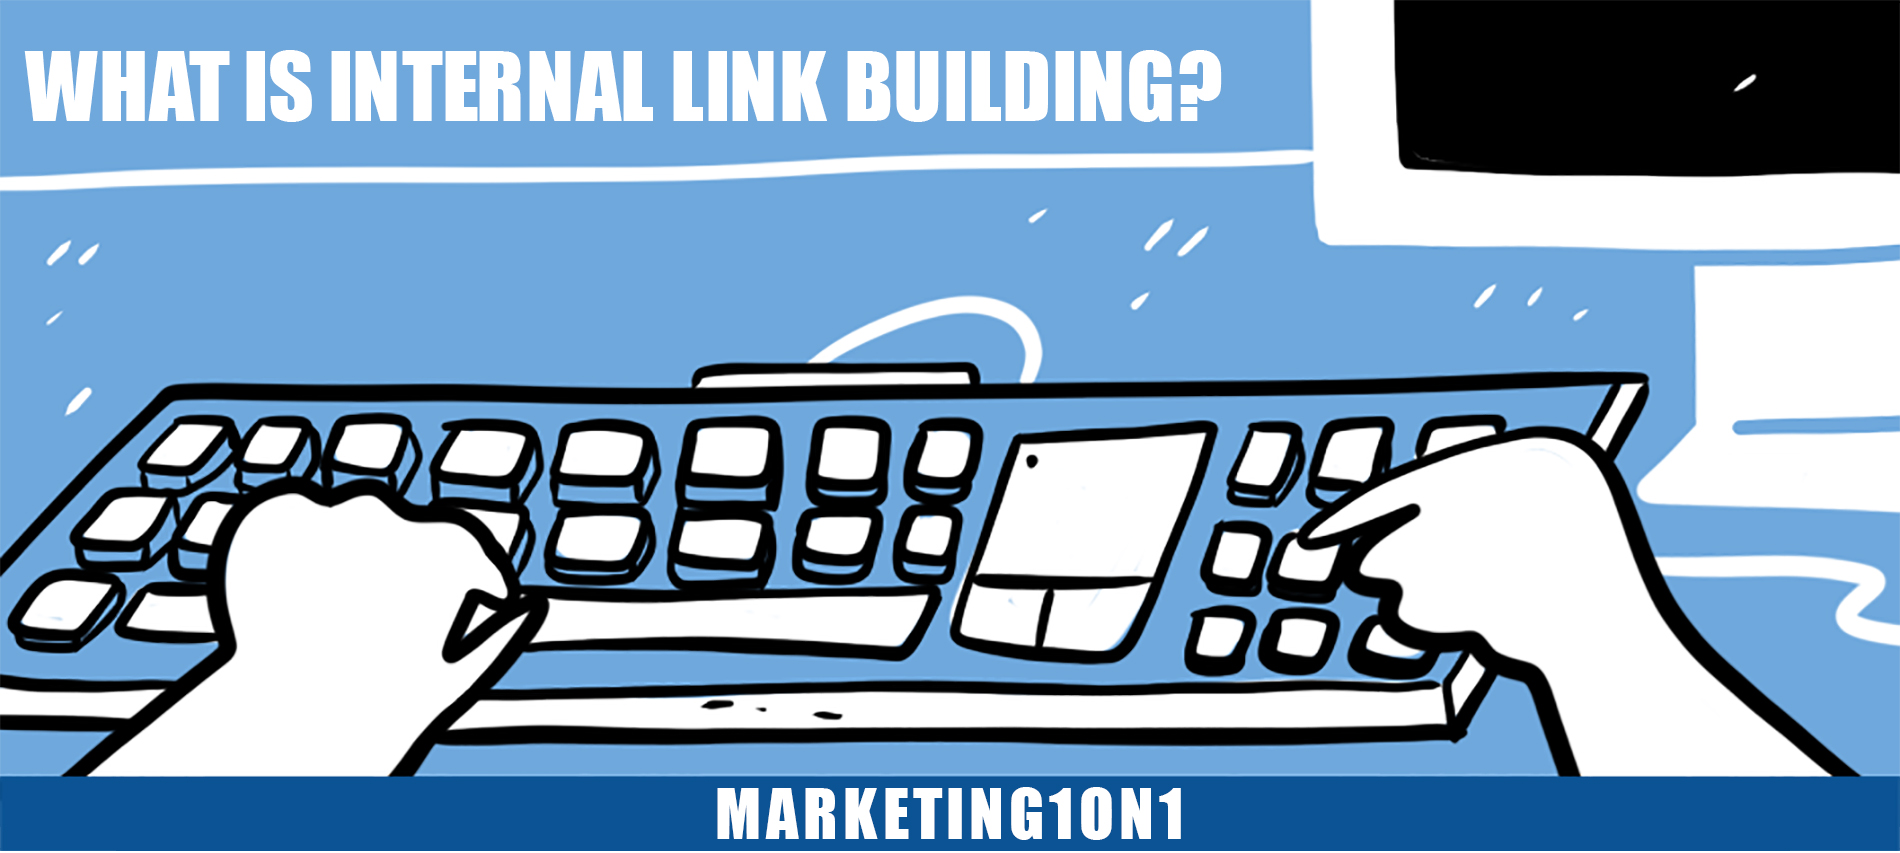 What is internal link building?